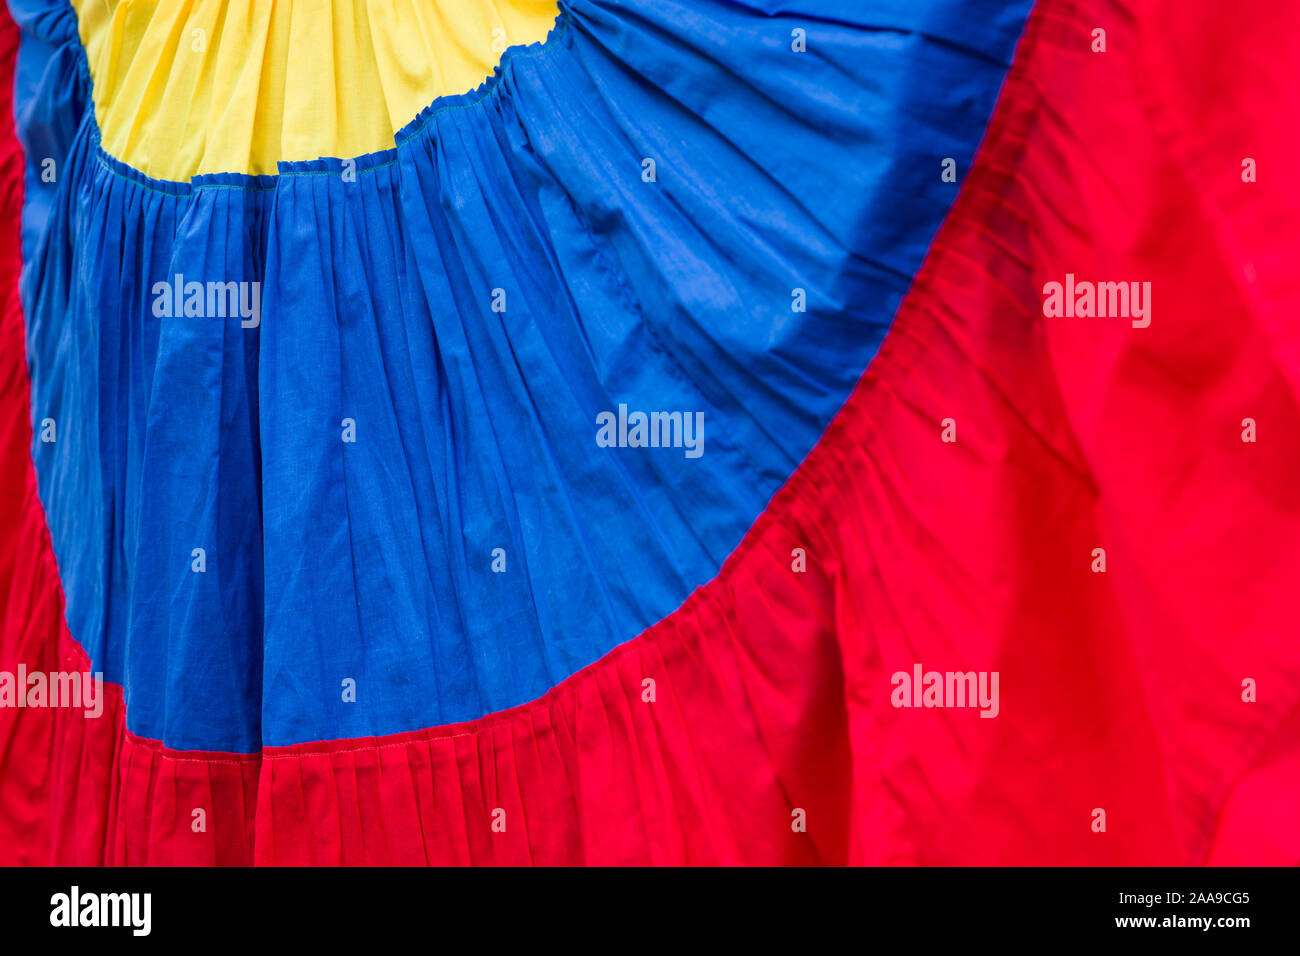 Closeup detail of Palenquera, fruit seller, dress in the colors of Colombian flag Stock Photo